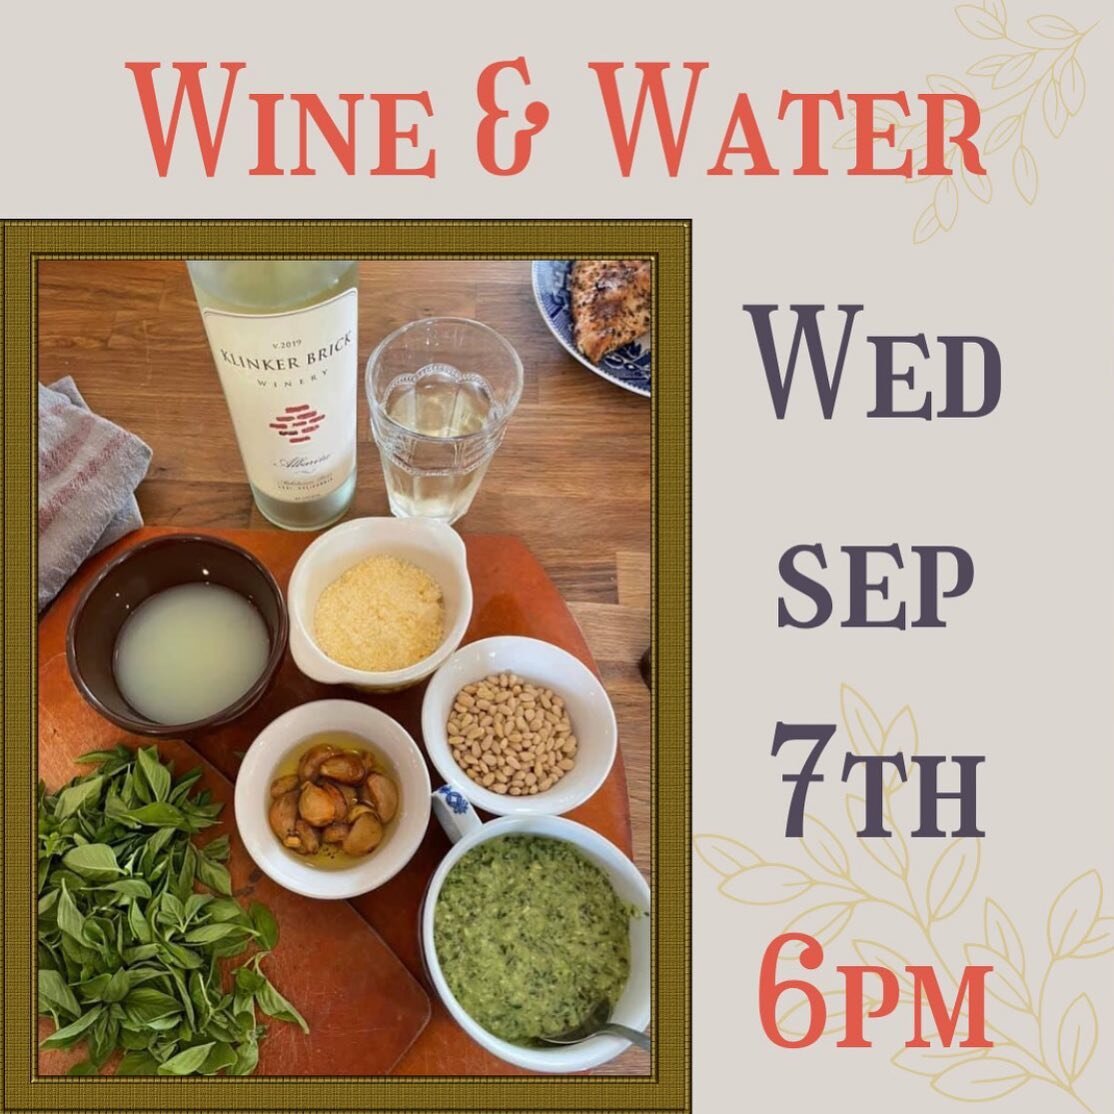 Join us tomorrow at 6pm LIVE for Wine and Water!
Salsa Verde Chicken Skillet!
Yummm!!!